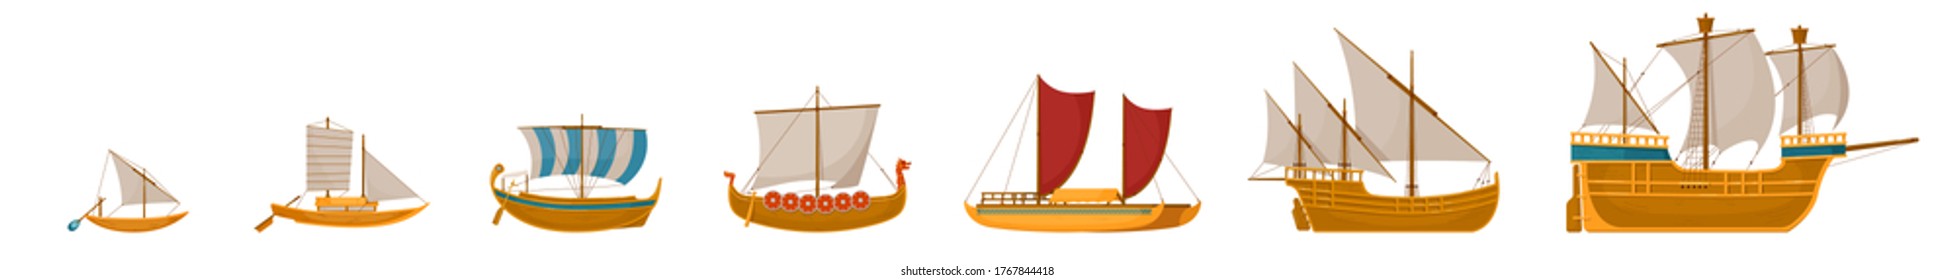 Vintage sailboats set. Isolated cartoon vintage wooden sail boat ship icon collection. Vector old nautical sailboat vessel and ocean travel concept Stock Vector